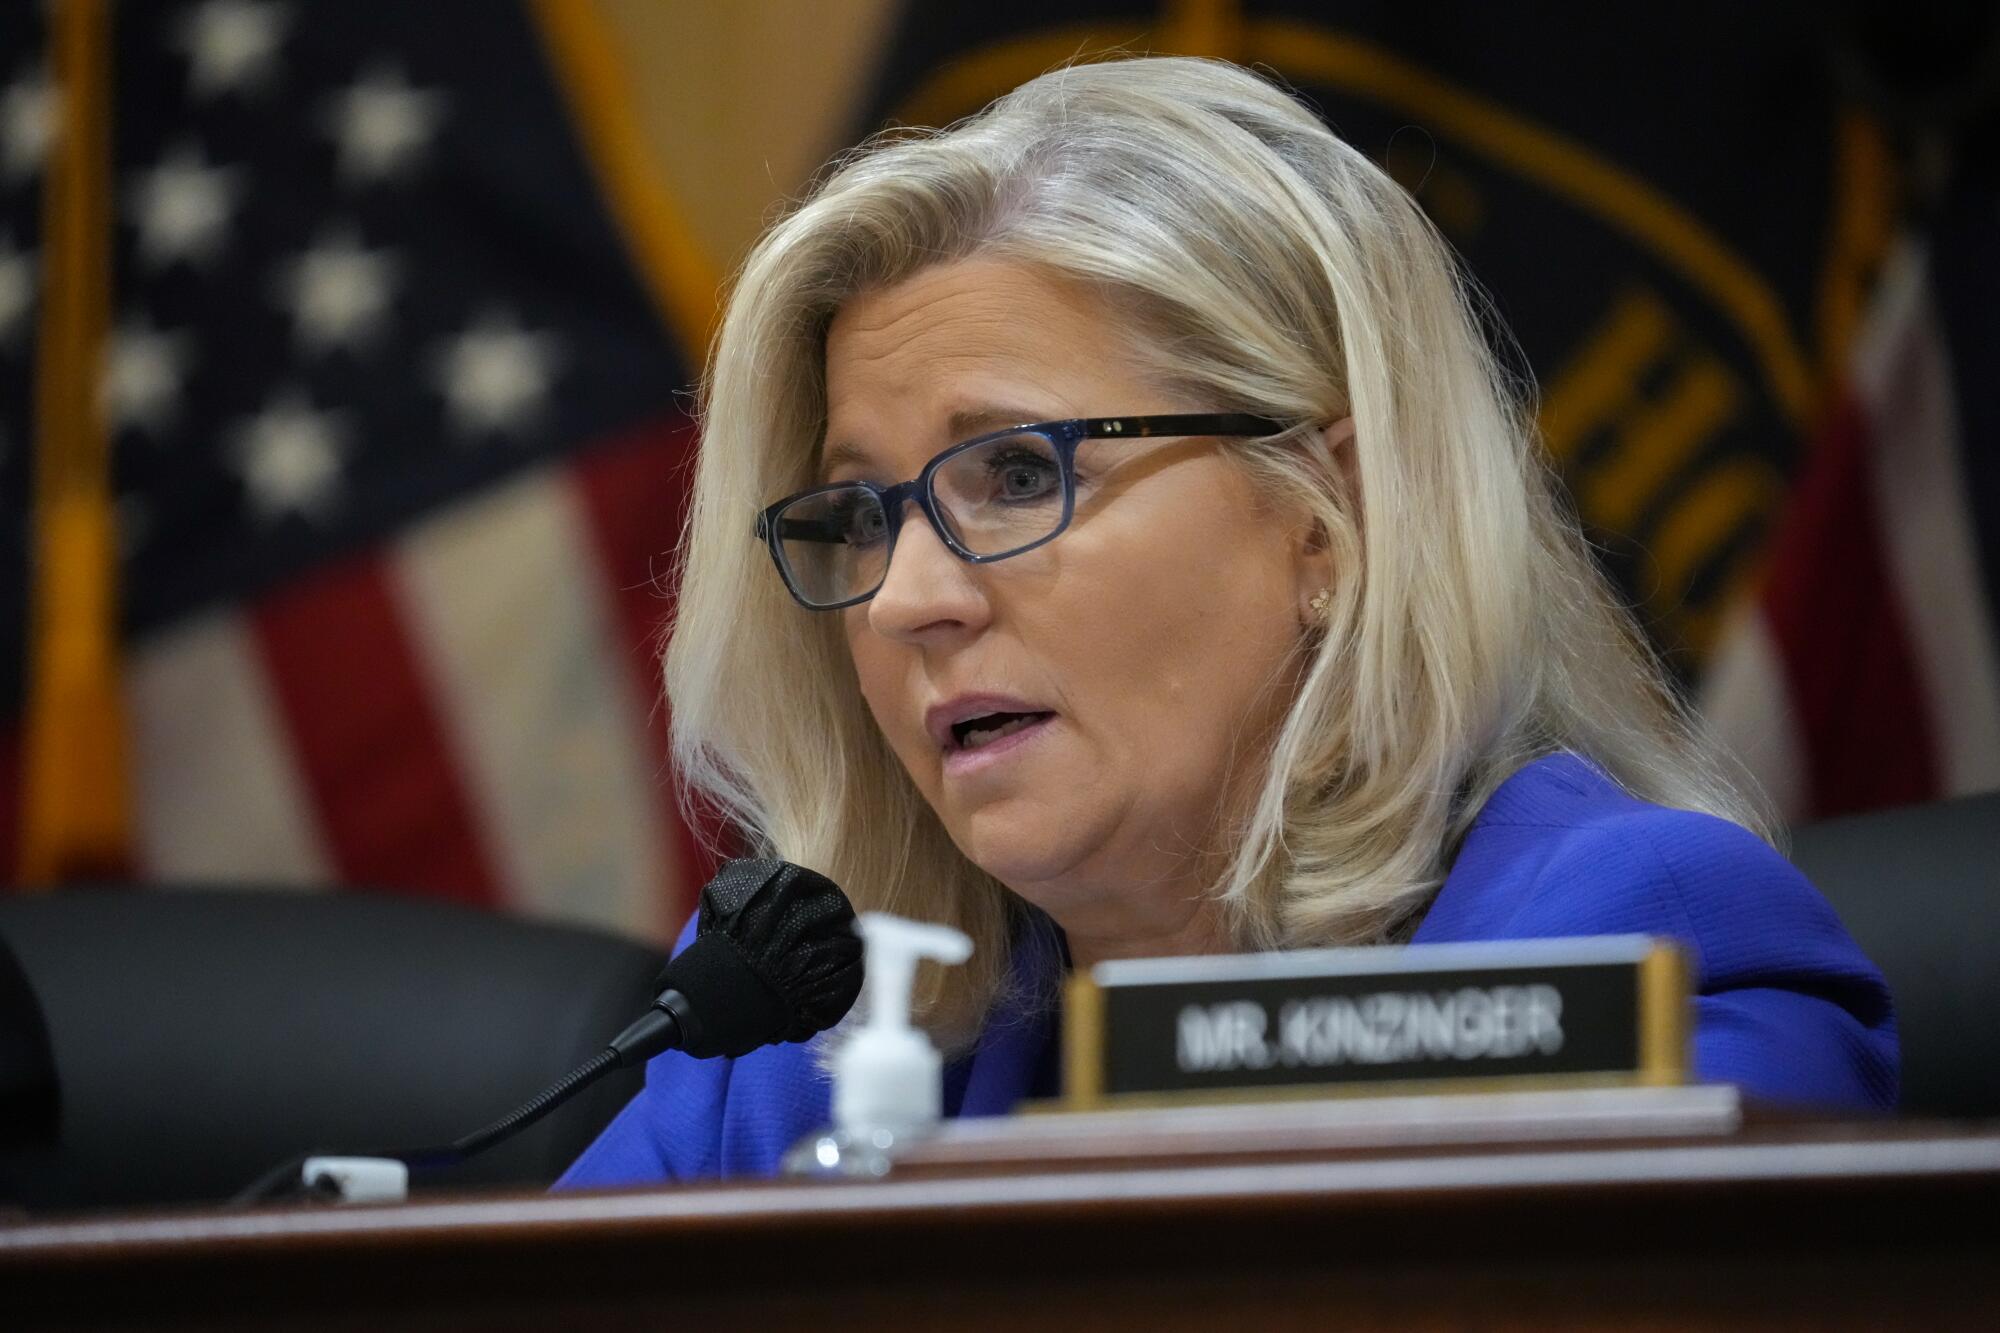 Rep. Liz Cheney speaking into a microphone while seated